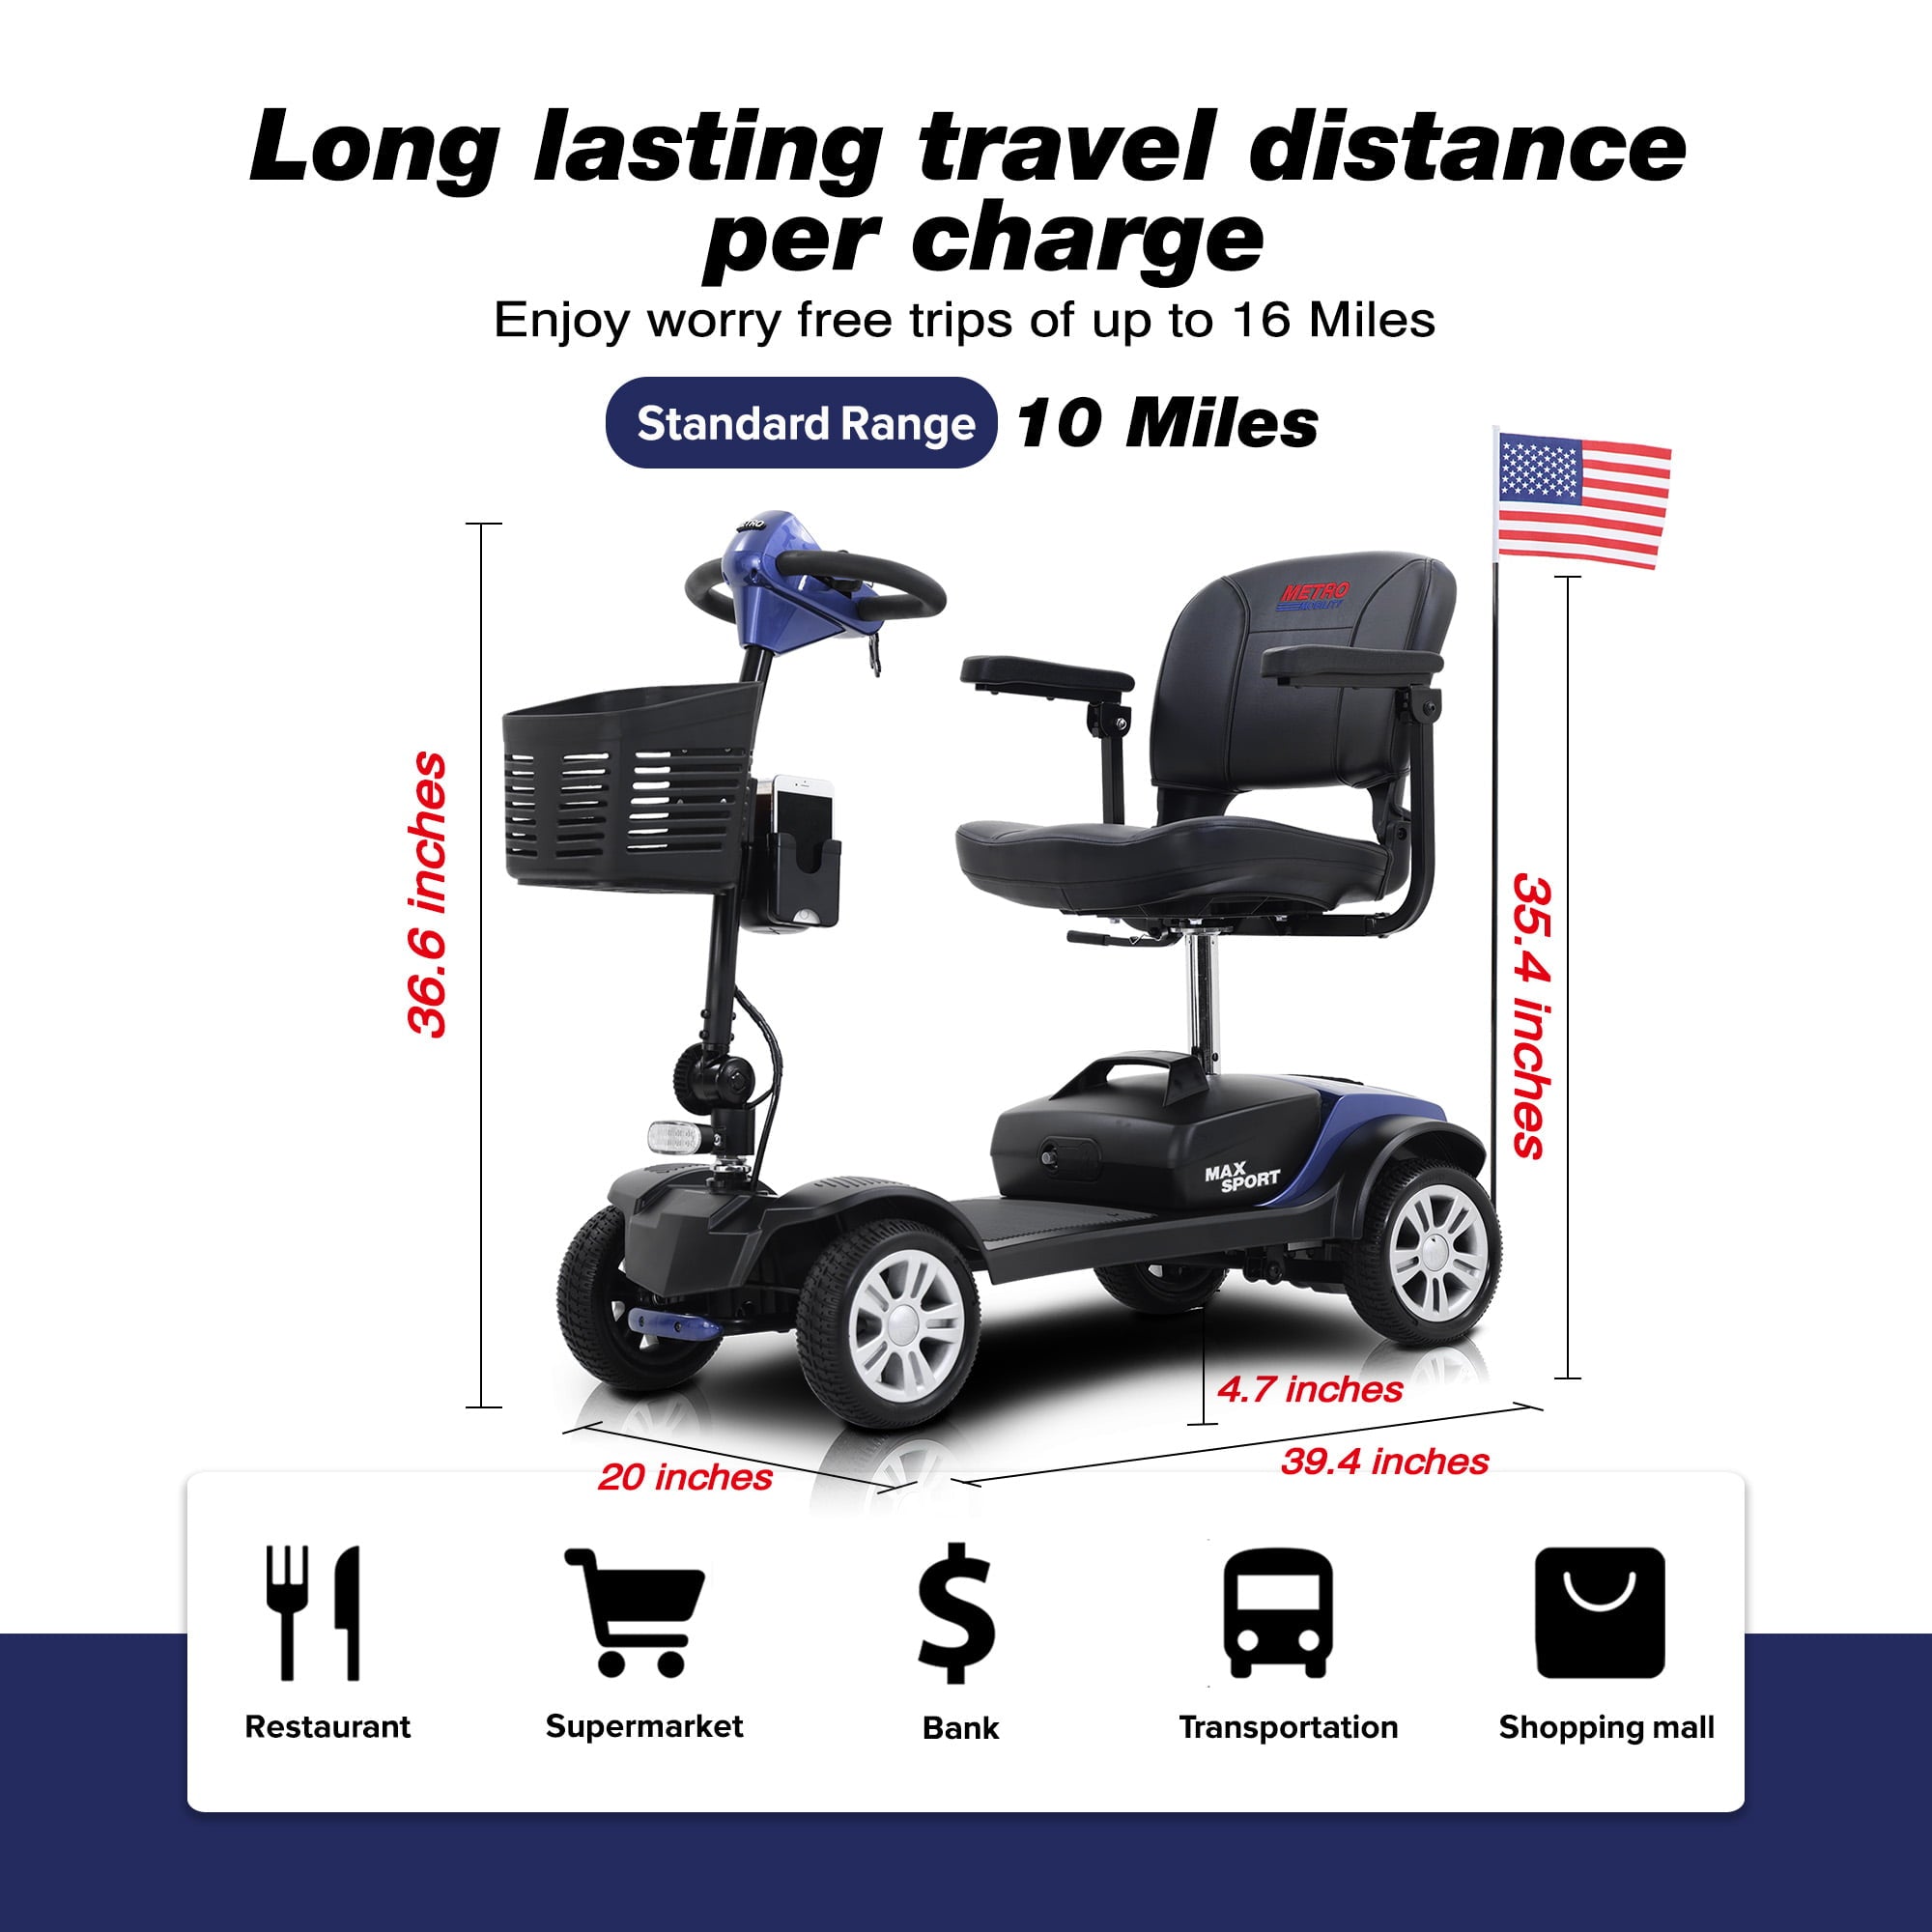 Kowilk  4 Wheel Mobility Scooters- Folding Electric Powered Wheelchair Device for Seniors Adults Elderly, Collapsible and Compact Heavy Duty Mobile for Travel with Basket